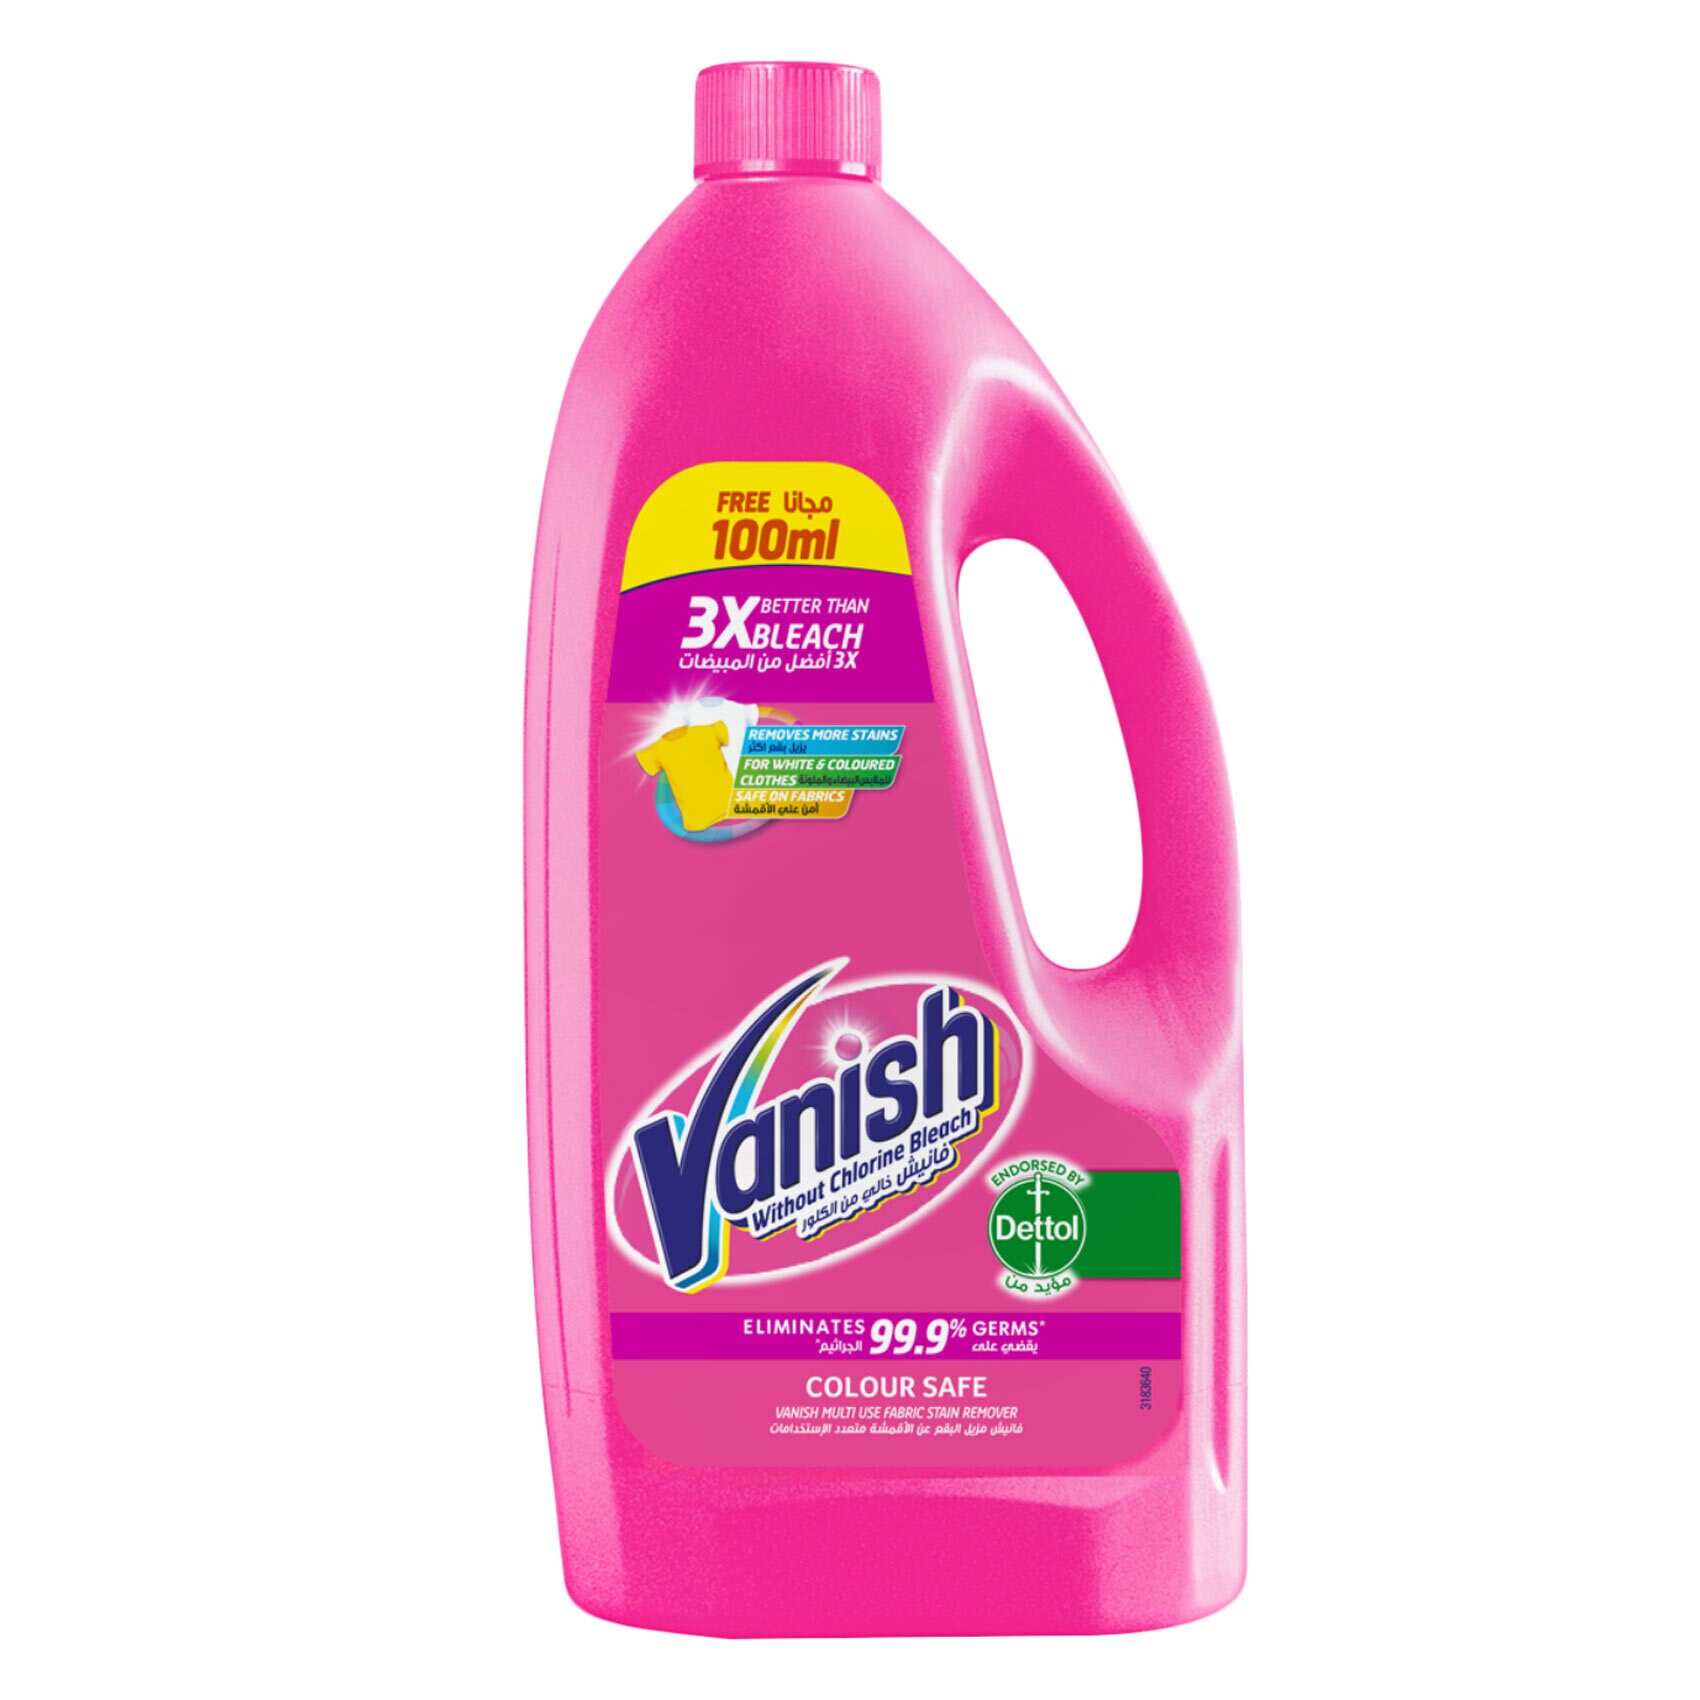 Buy Vanish Laundry Stain Remover Liquid for White & Colored